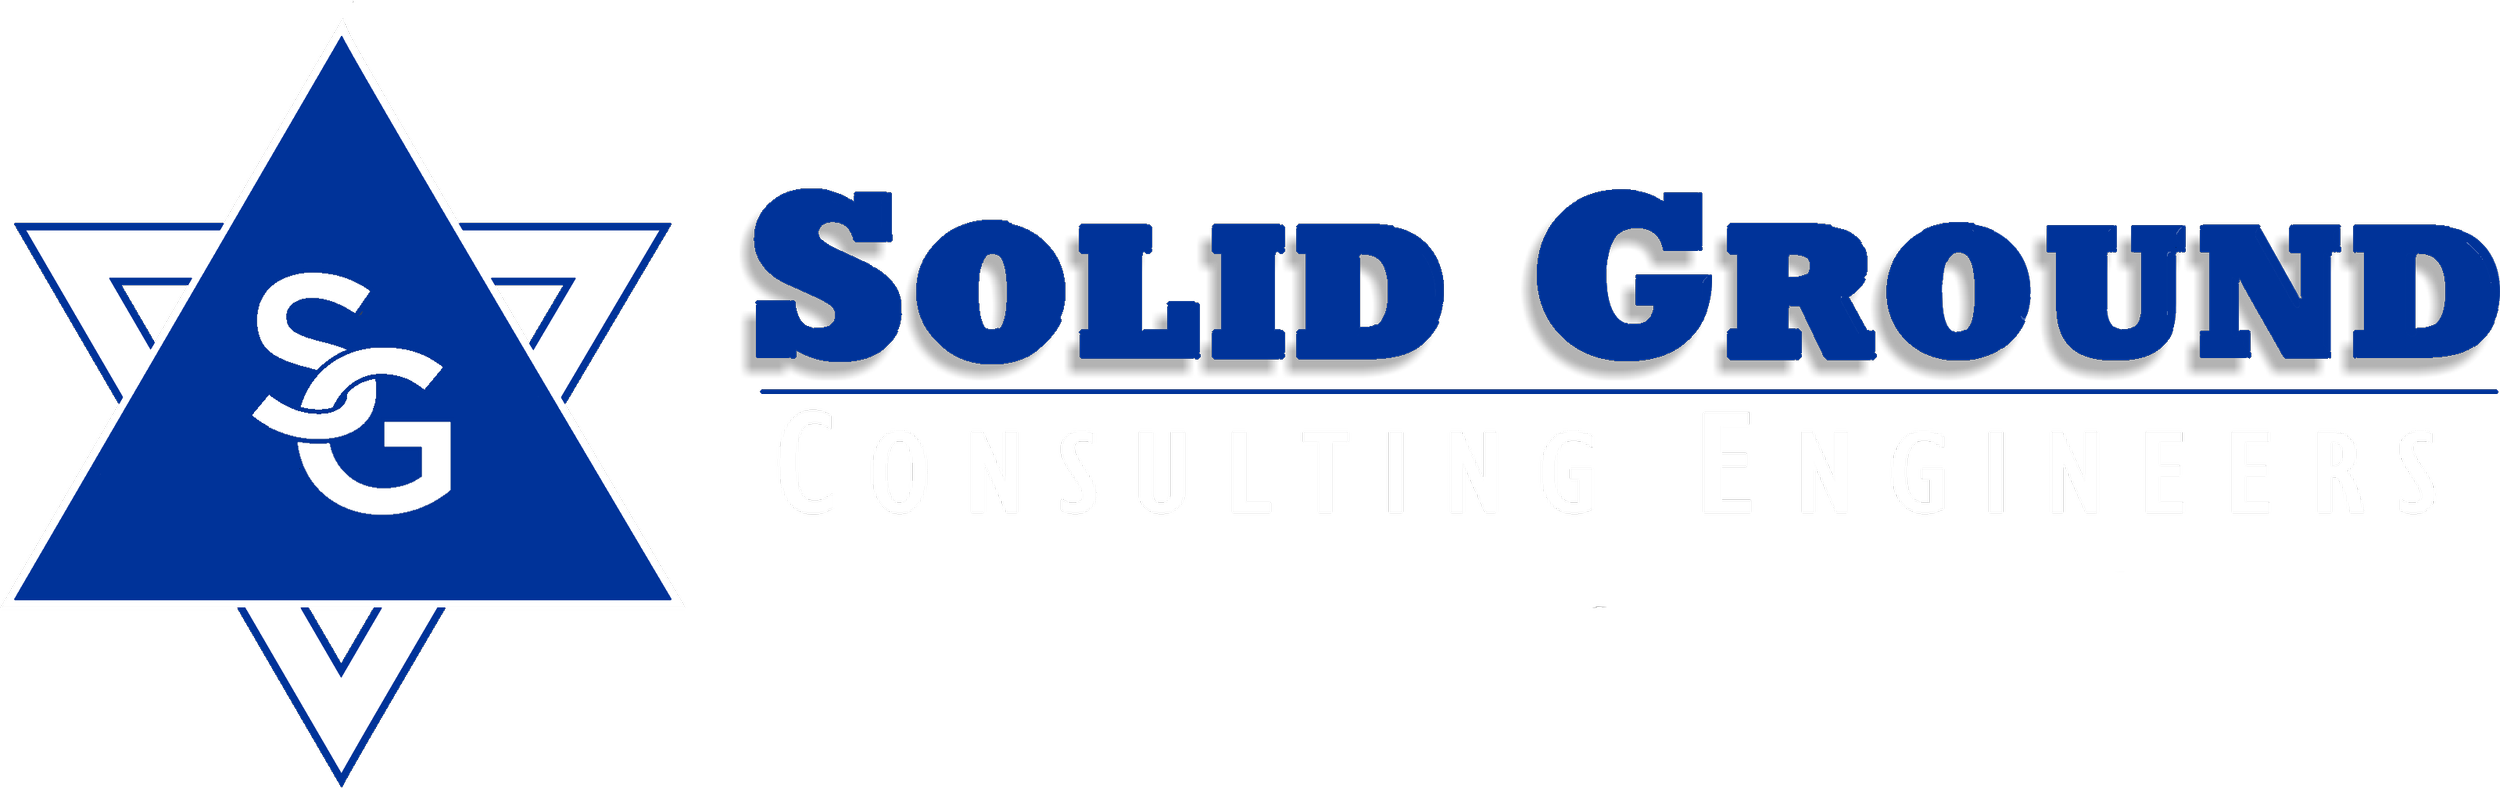 Solid Ground Consulting Engineers